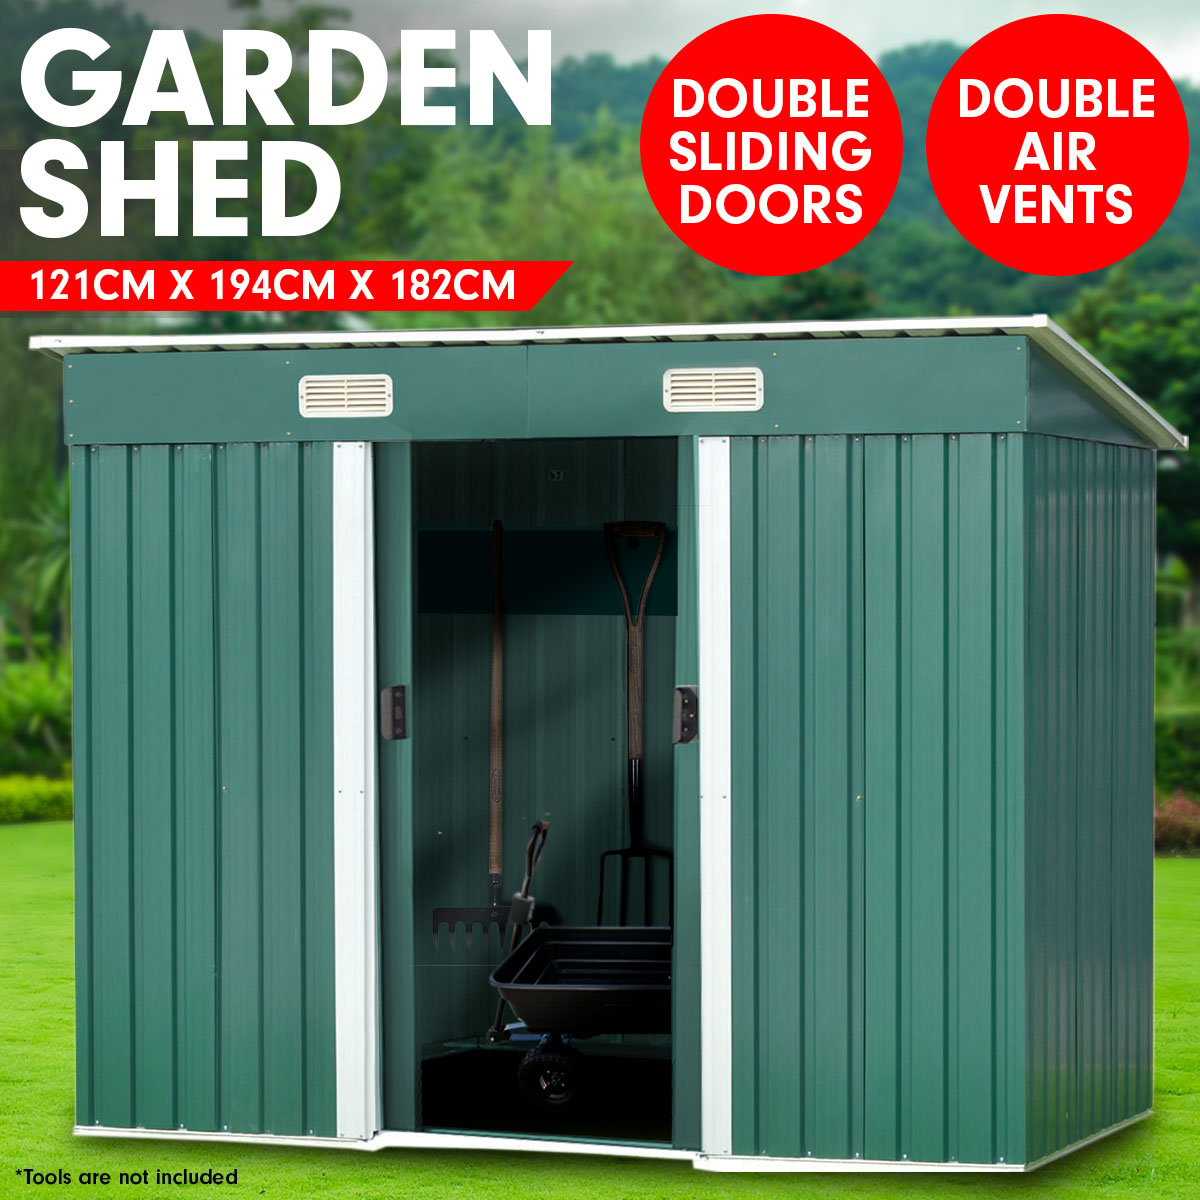 Garden Shed Flat 4ft x 6ft Outdoor Storage Shelter - Green 1